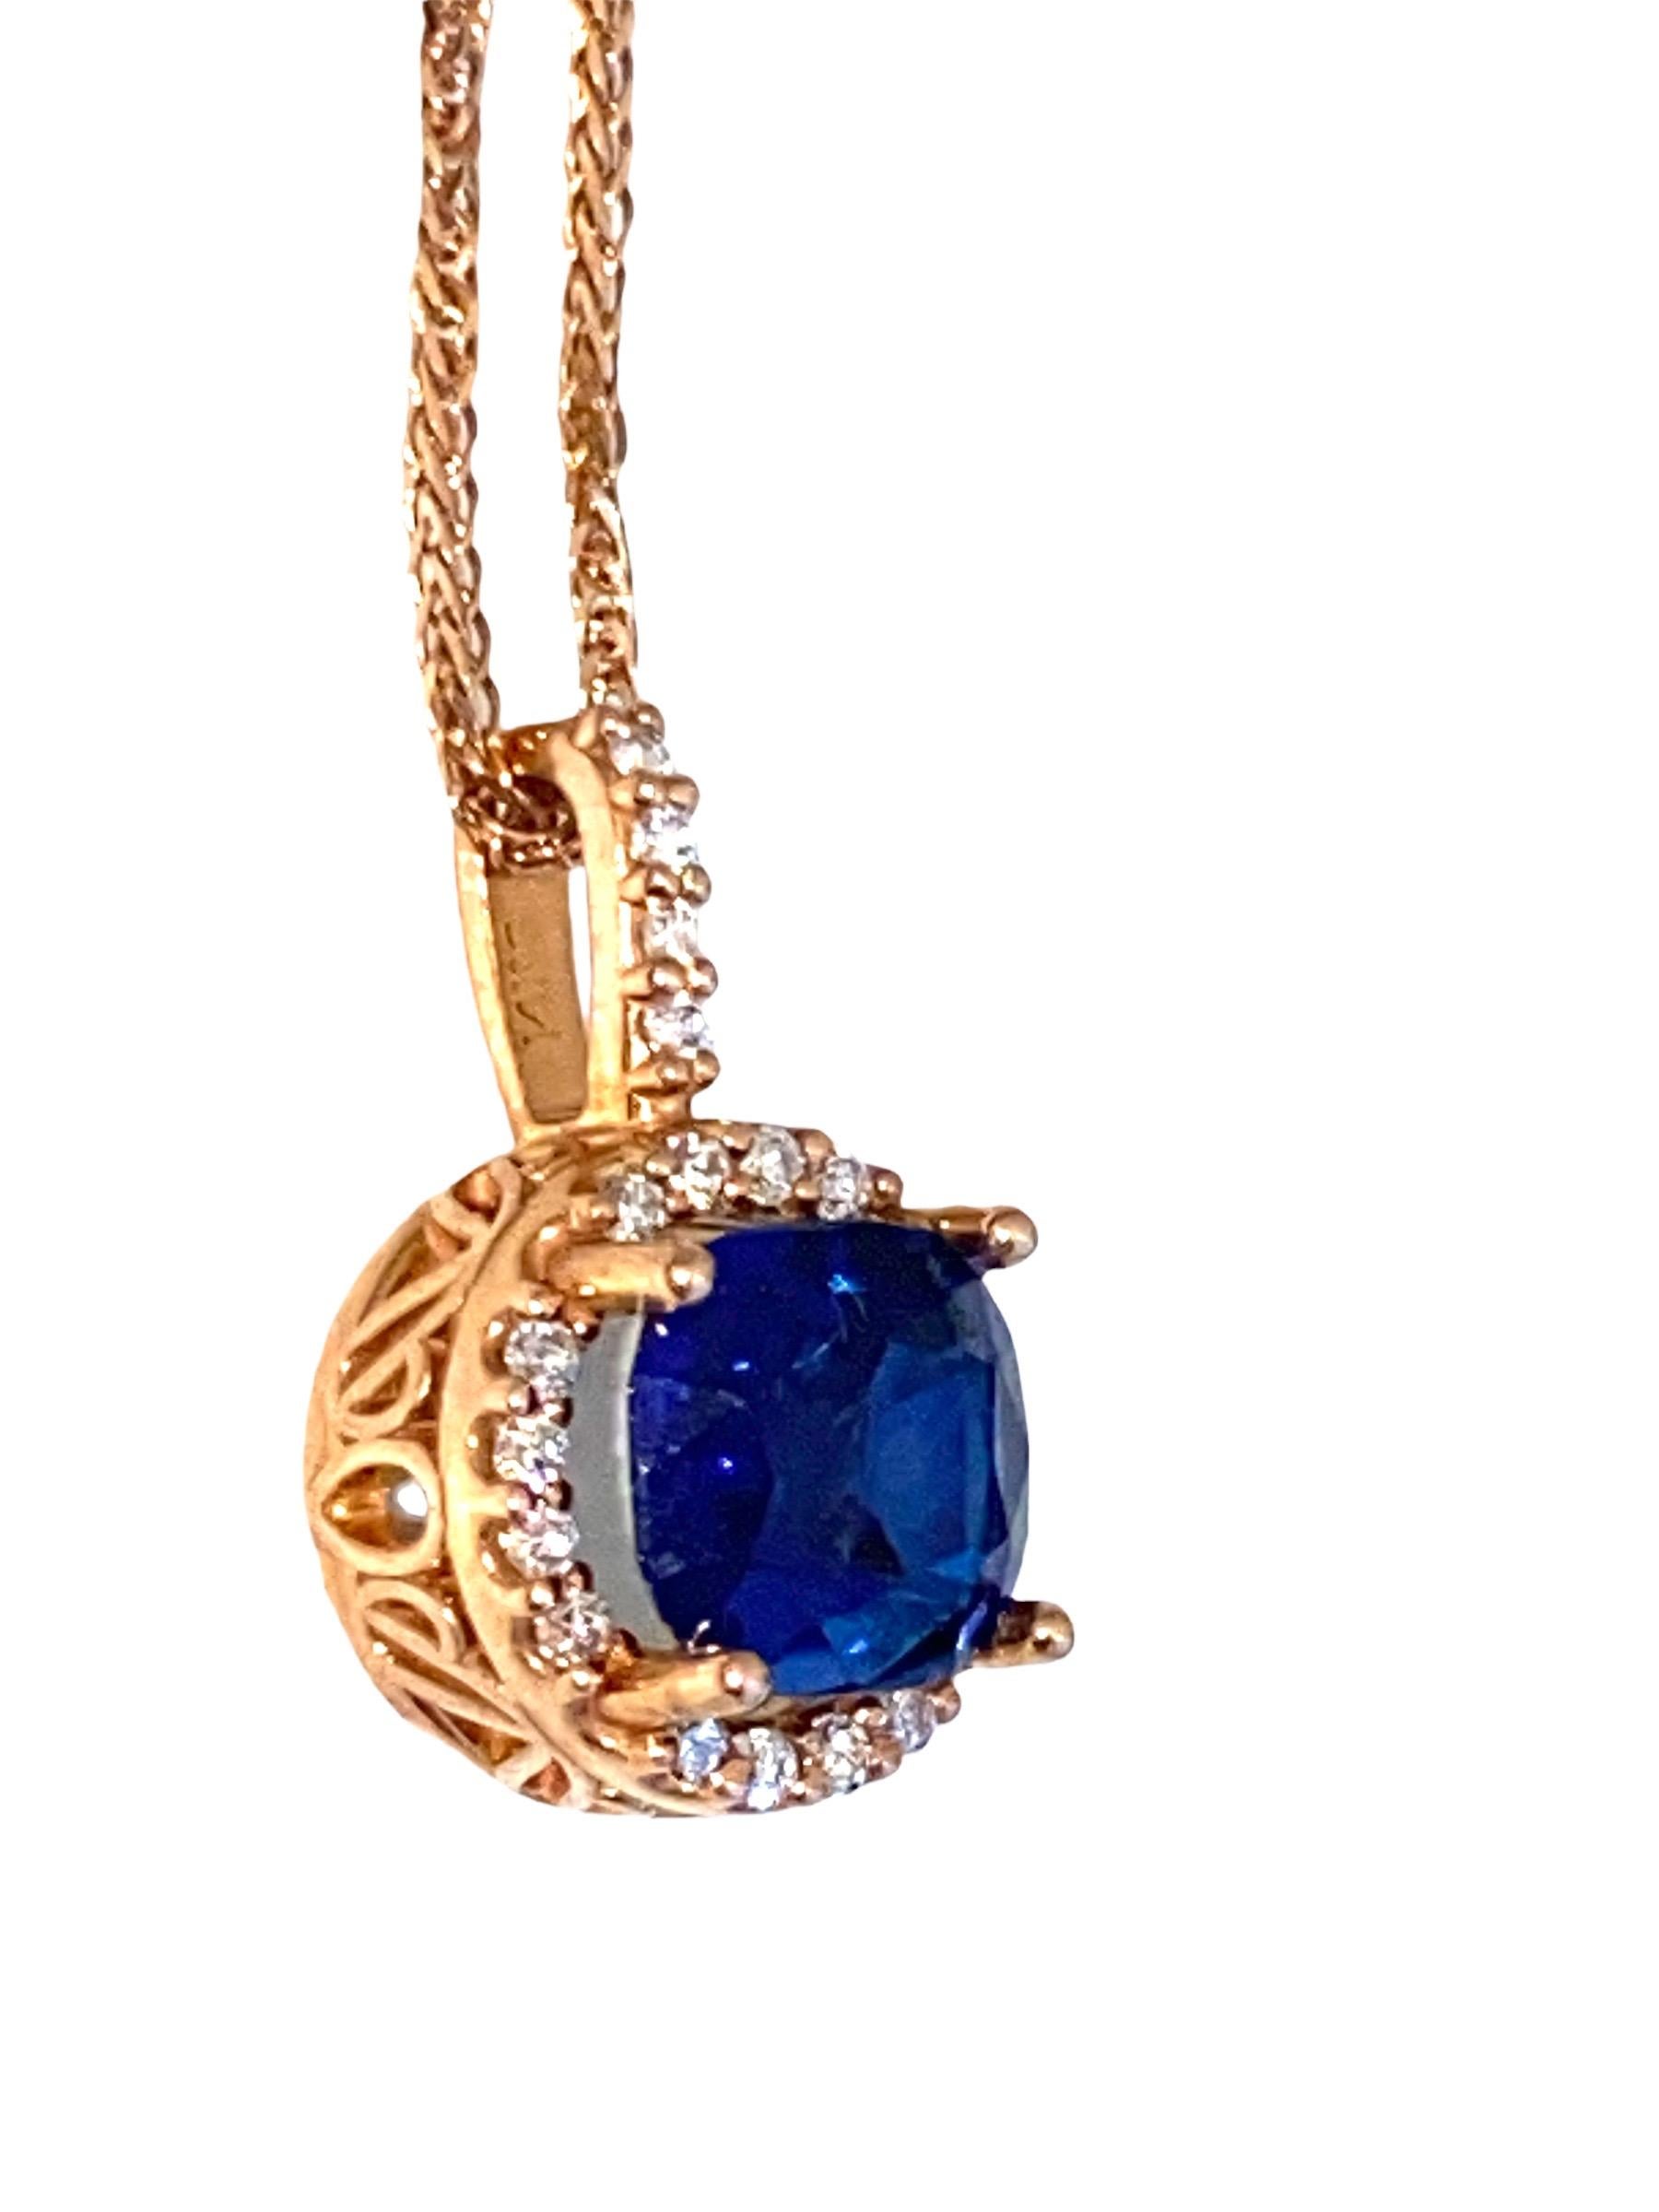 Contemporary 1.90 CT Cushion Cut Sapphire and Diamond Pink Gold Necklace For Sale